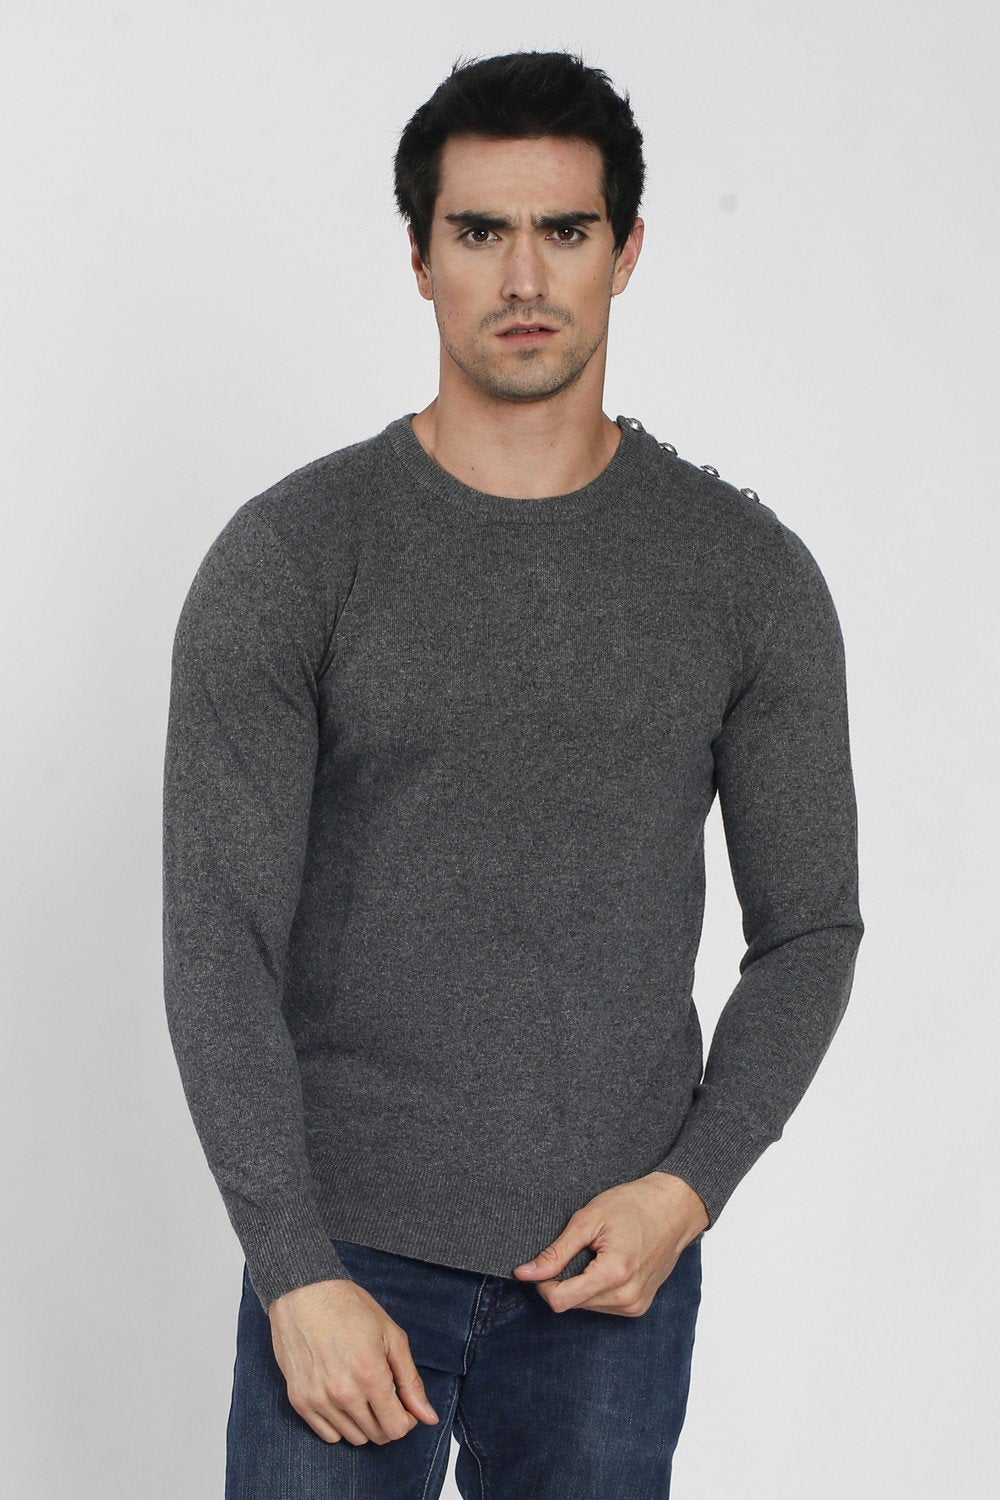 ROUND COLLAR SWEATER WITH SHOULDER BUTTONS